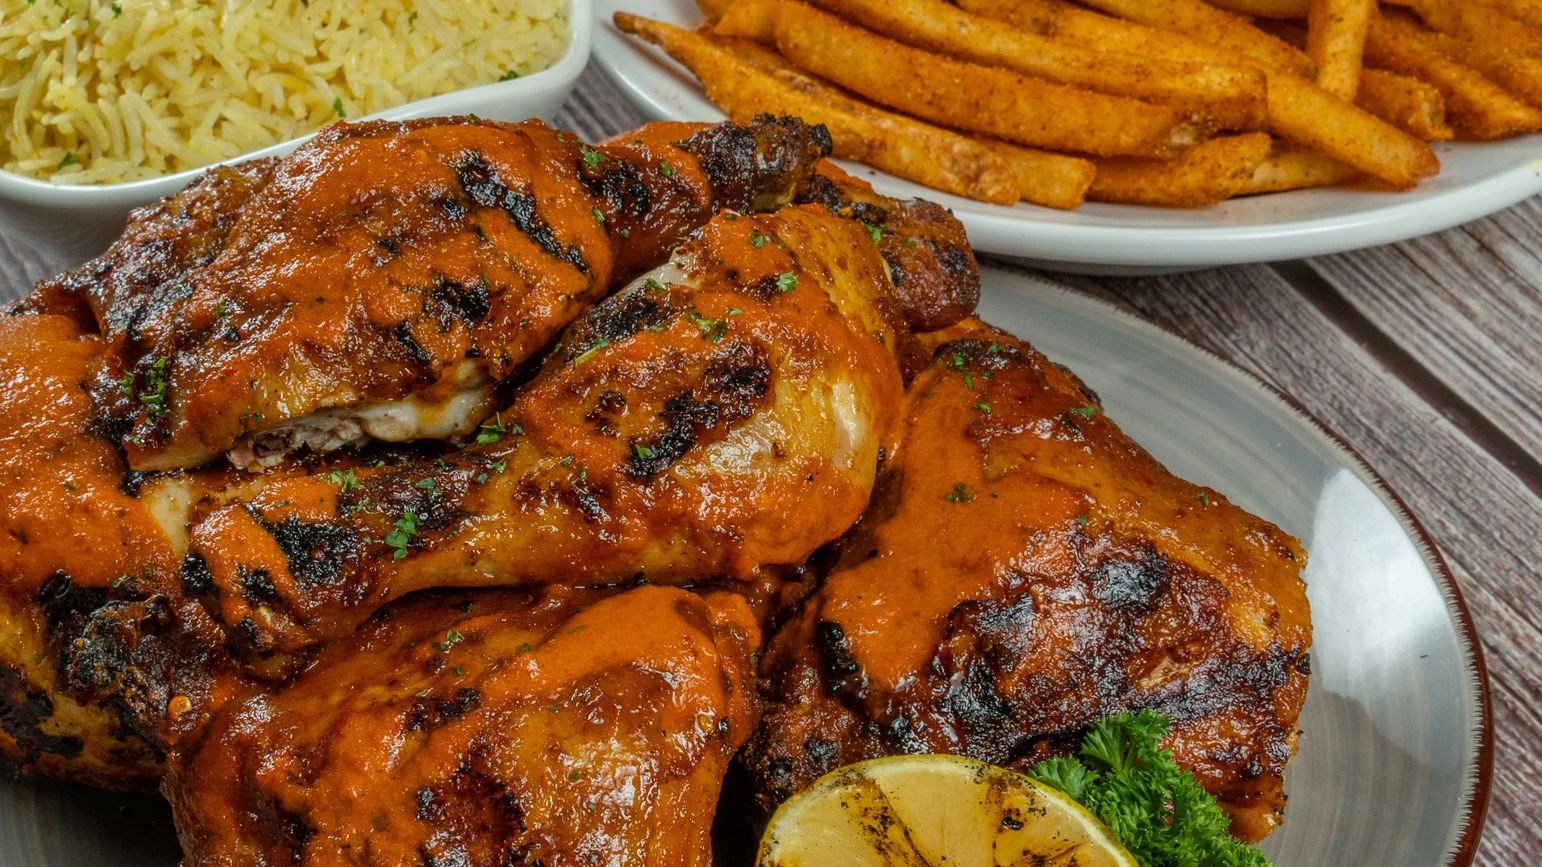 Flame grilled whole chicken on a plate with sided or basmati house rice and peri peri fires.